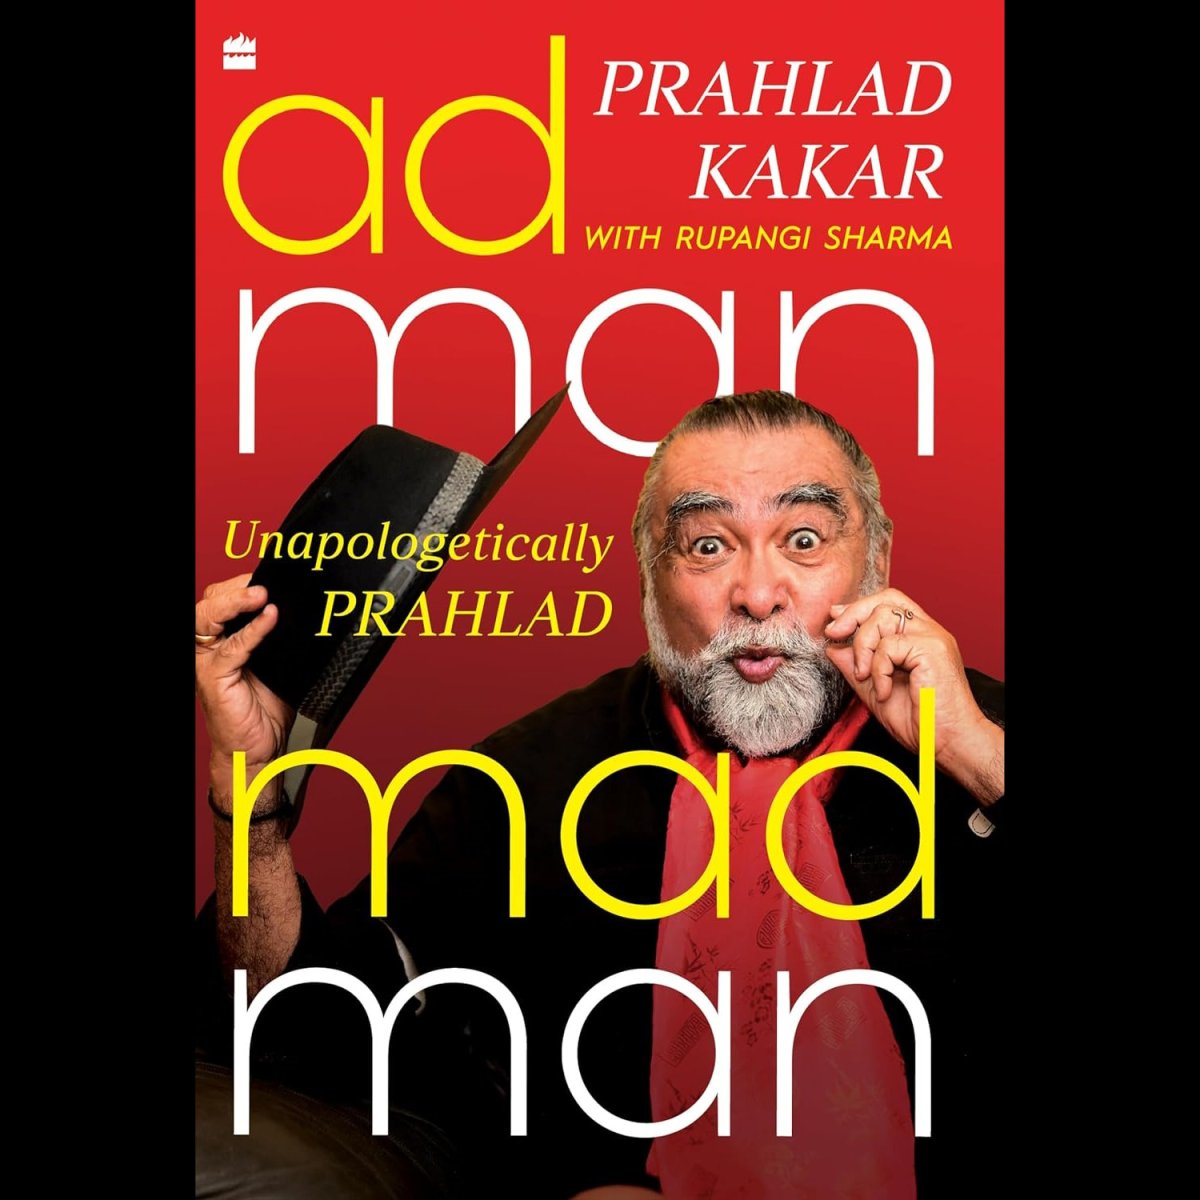 Book Review: Adman Madman – Unapologetically Prahlad